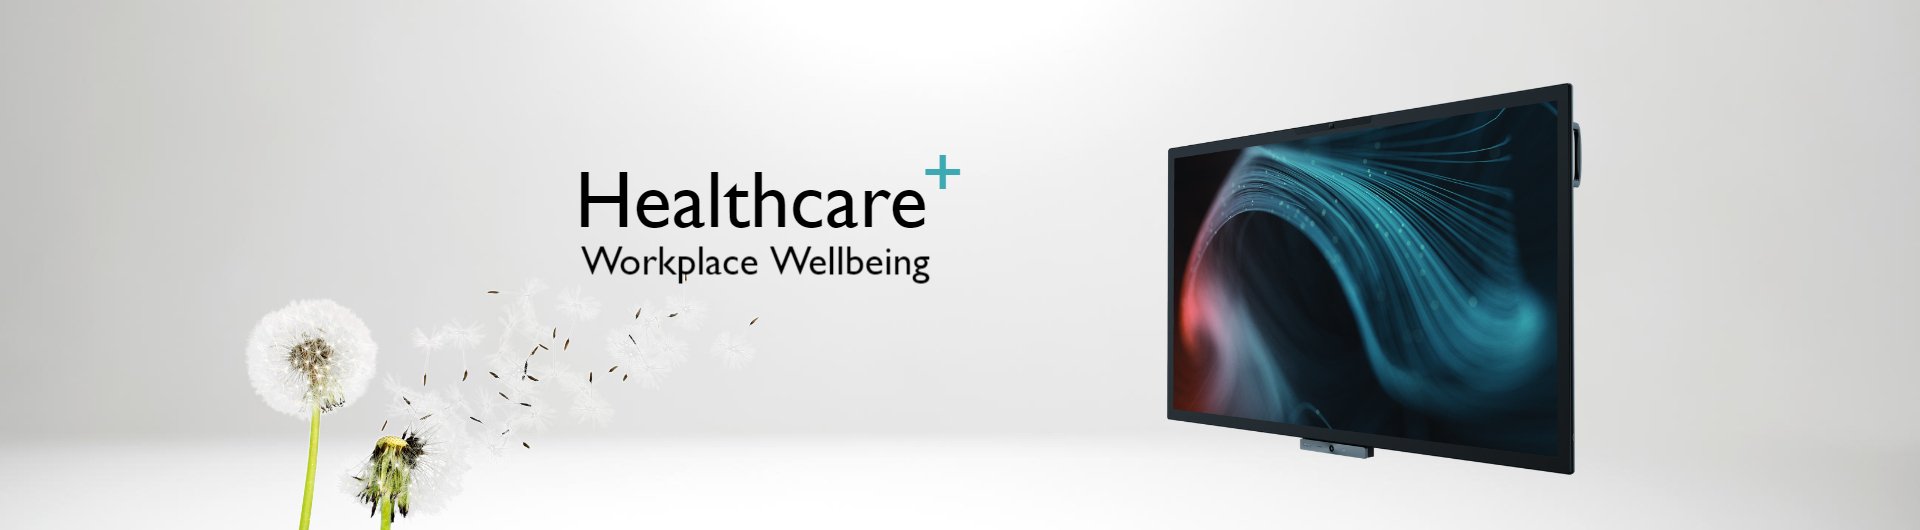 Healthcare+ workplace wellbeing